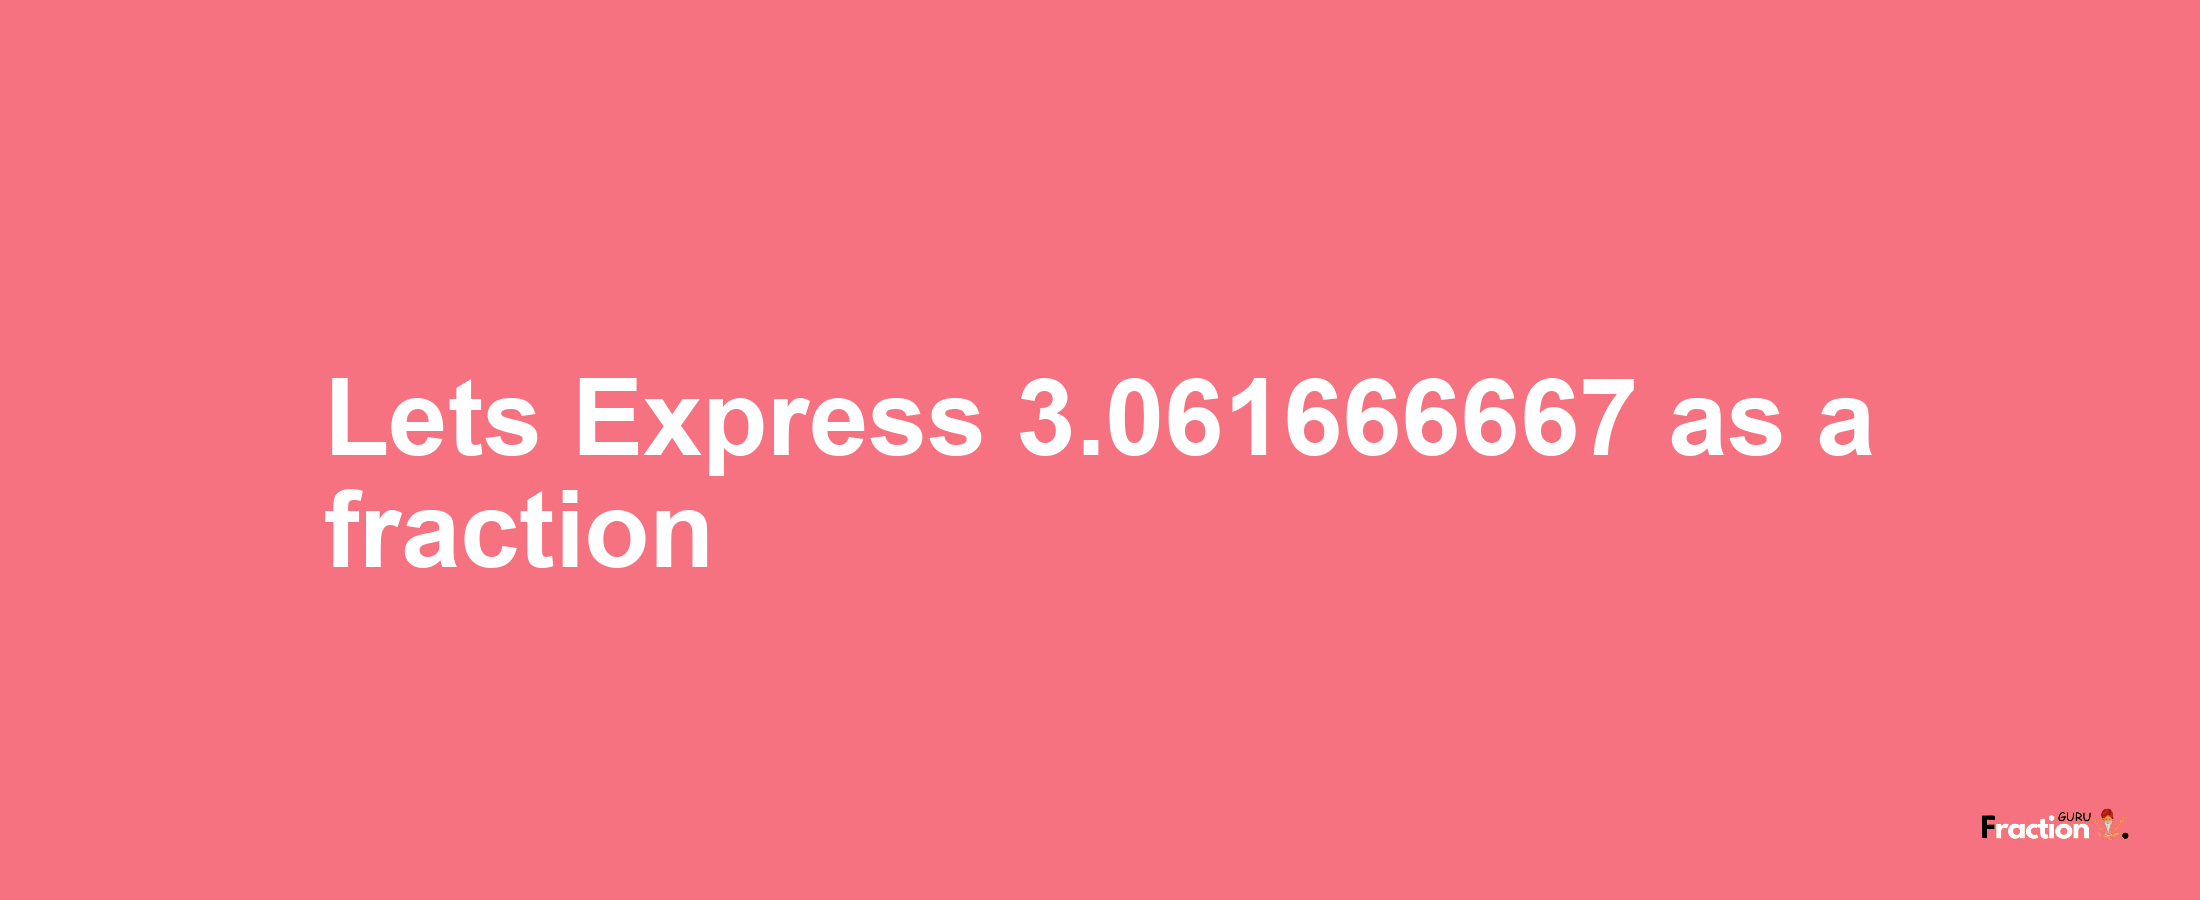 Lets Express 3.061666667 as afraction